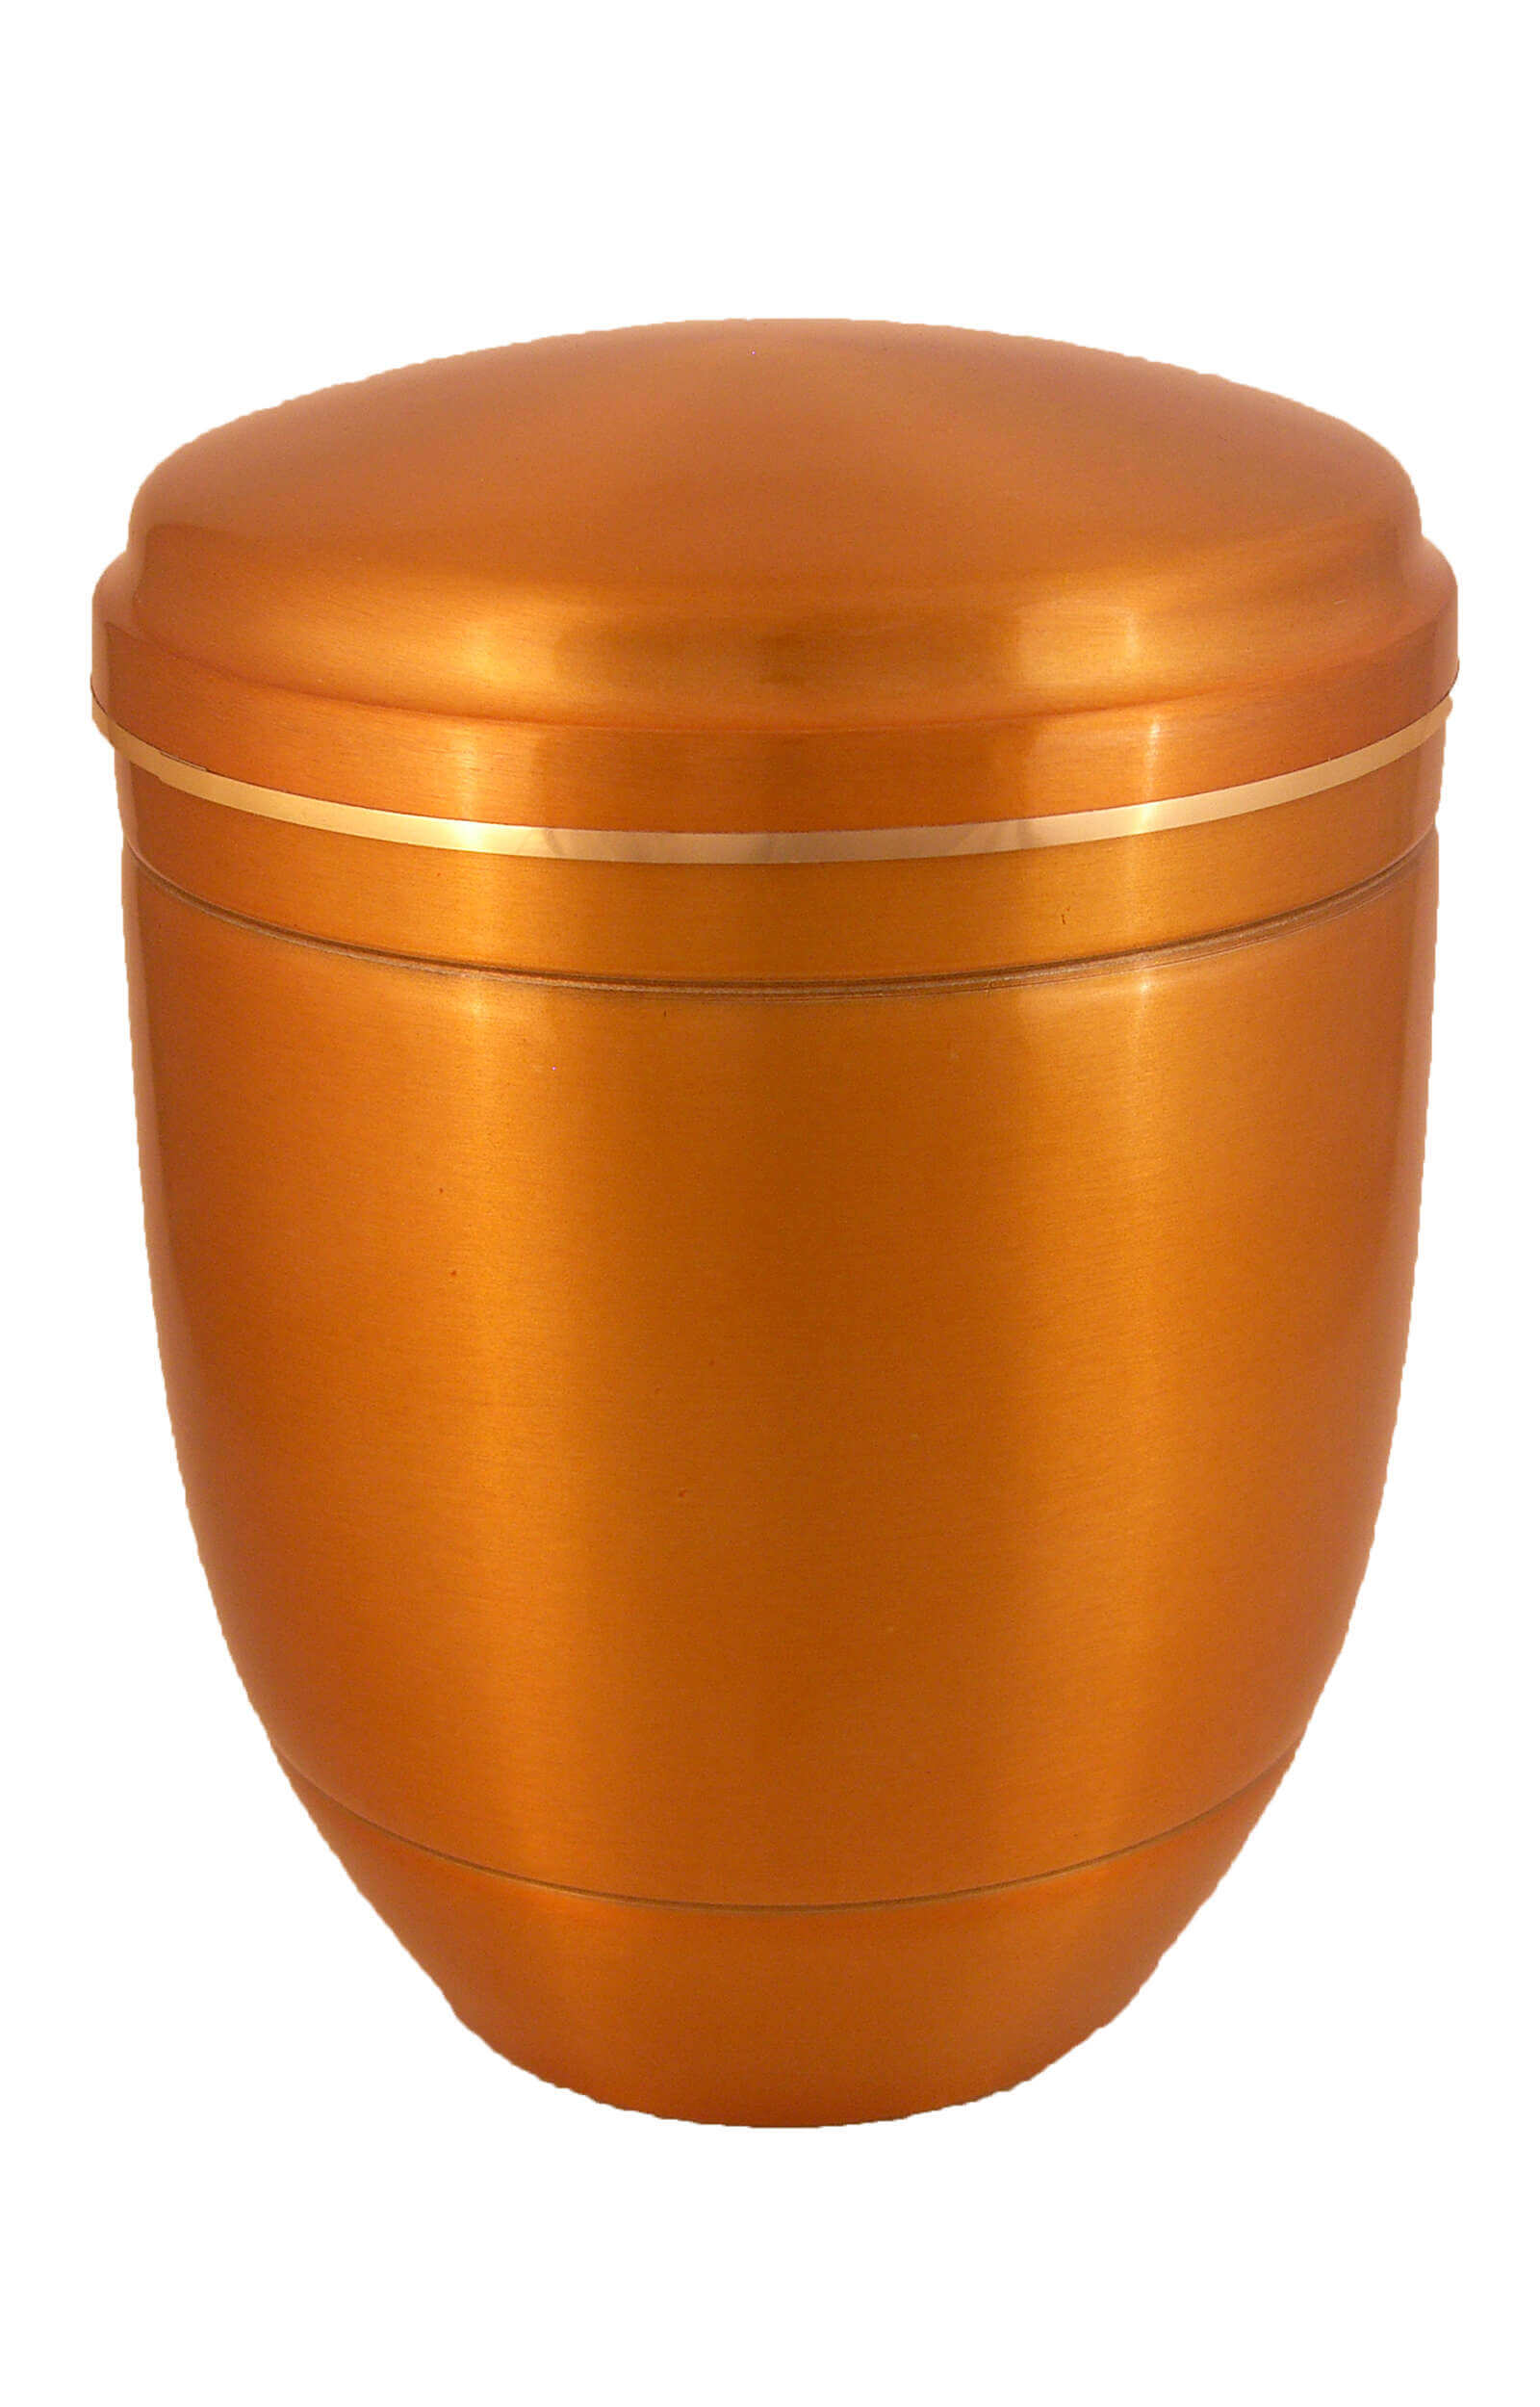 en AG5477 funeral urn for human ashes metall urn gold glossy